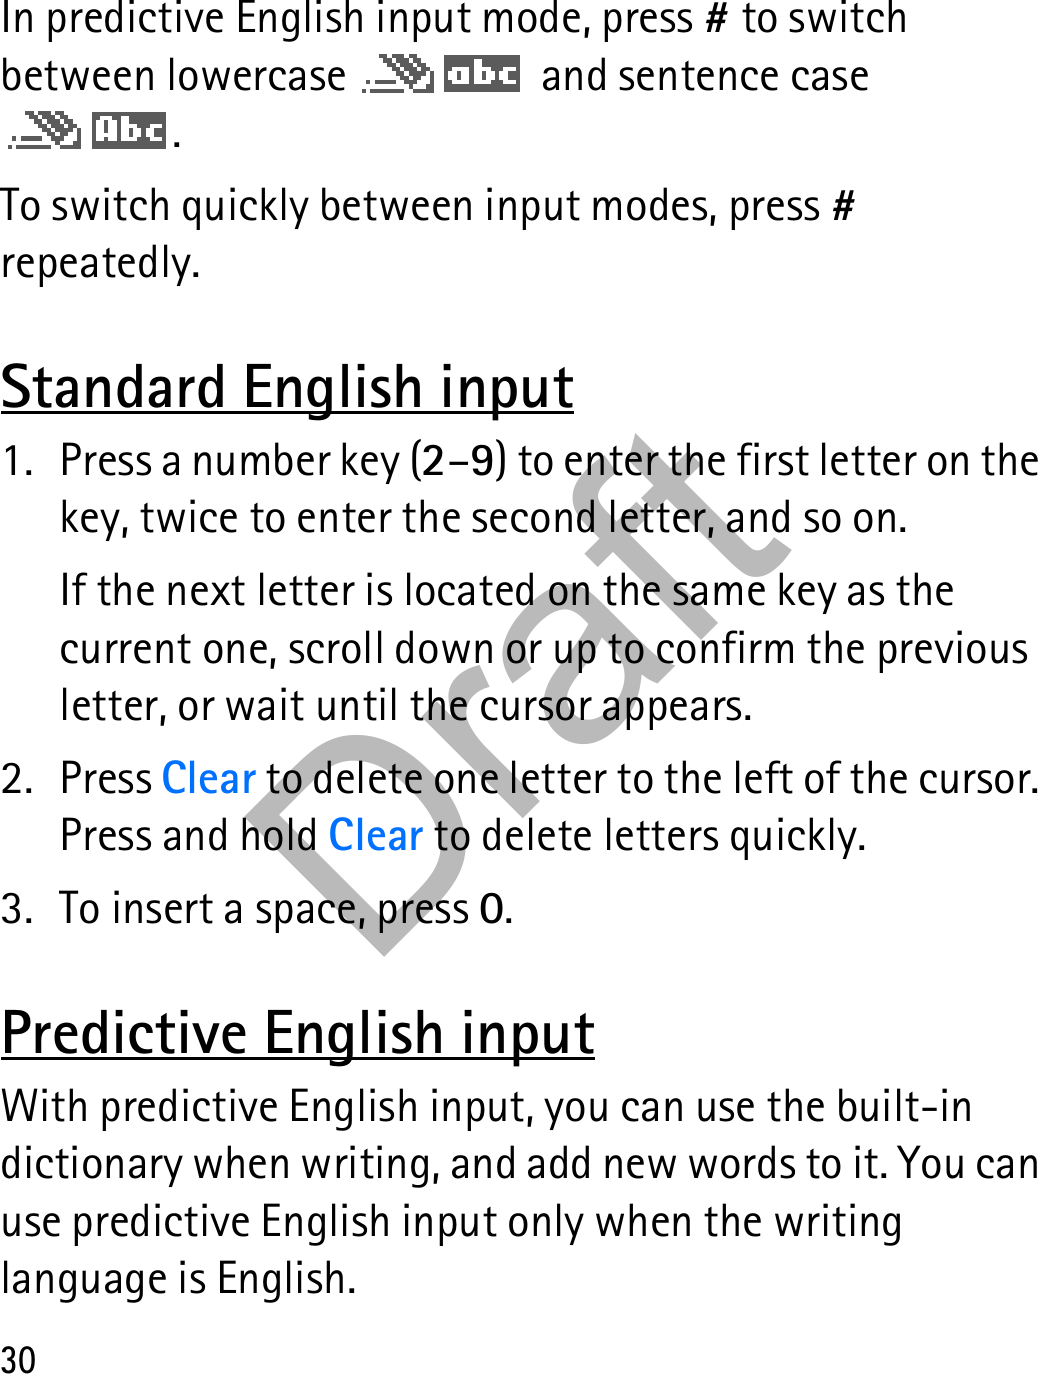 30In predictive English input mode, press # to switch between lowercase   and sentence case .To switch quickly between input modes, press # repeatedly. Standard English input1. Press a number key (2–9) to enter the first letter on the key, twice to enter the second letter, and so on.If the next letter is located on the same key as the current one, scroll down or up to confirm the previous letter, or wait until the cursor appears.2. Press Clear to delete one letter to the left of the cursor. Press and hold Clear to delete letters quickly.3. To insert a space, press 0.Predictive English inputWith predictive English input, you can use the built-in dictionary when writing, and add new words to it. You can use predictive English input only when the writing language is English.Draft